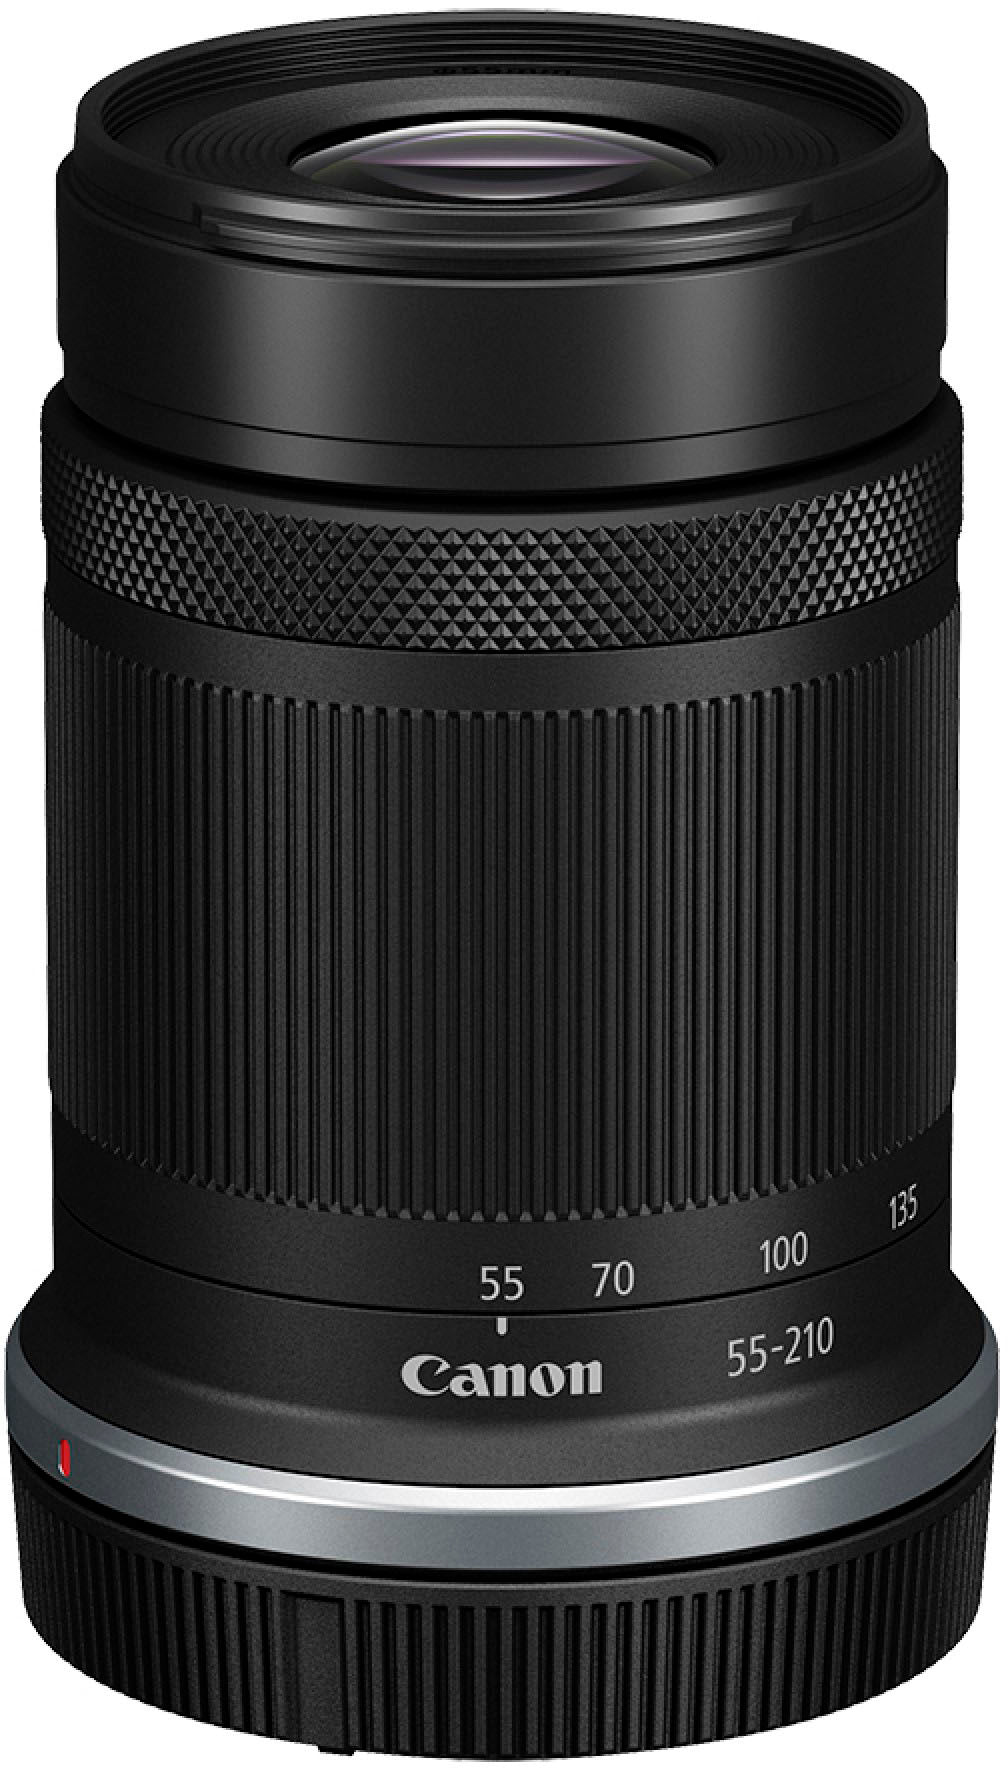 RF-S 55-210mm f/5-7.1 IS STM Telephoto Zoom Lens for Canon RF Mount Cameras - Black_6